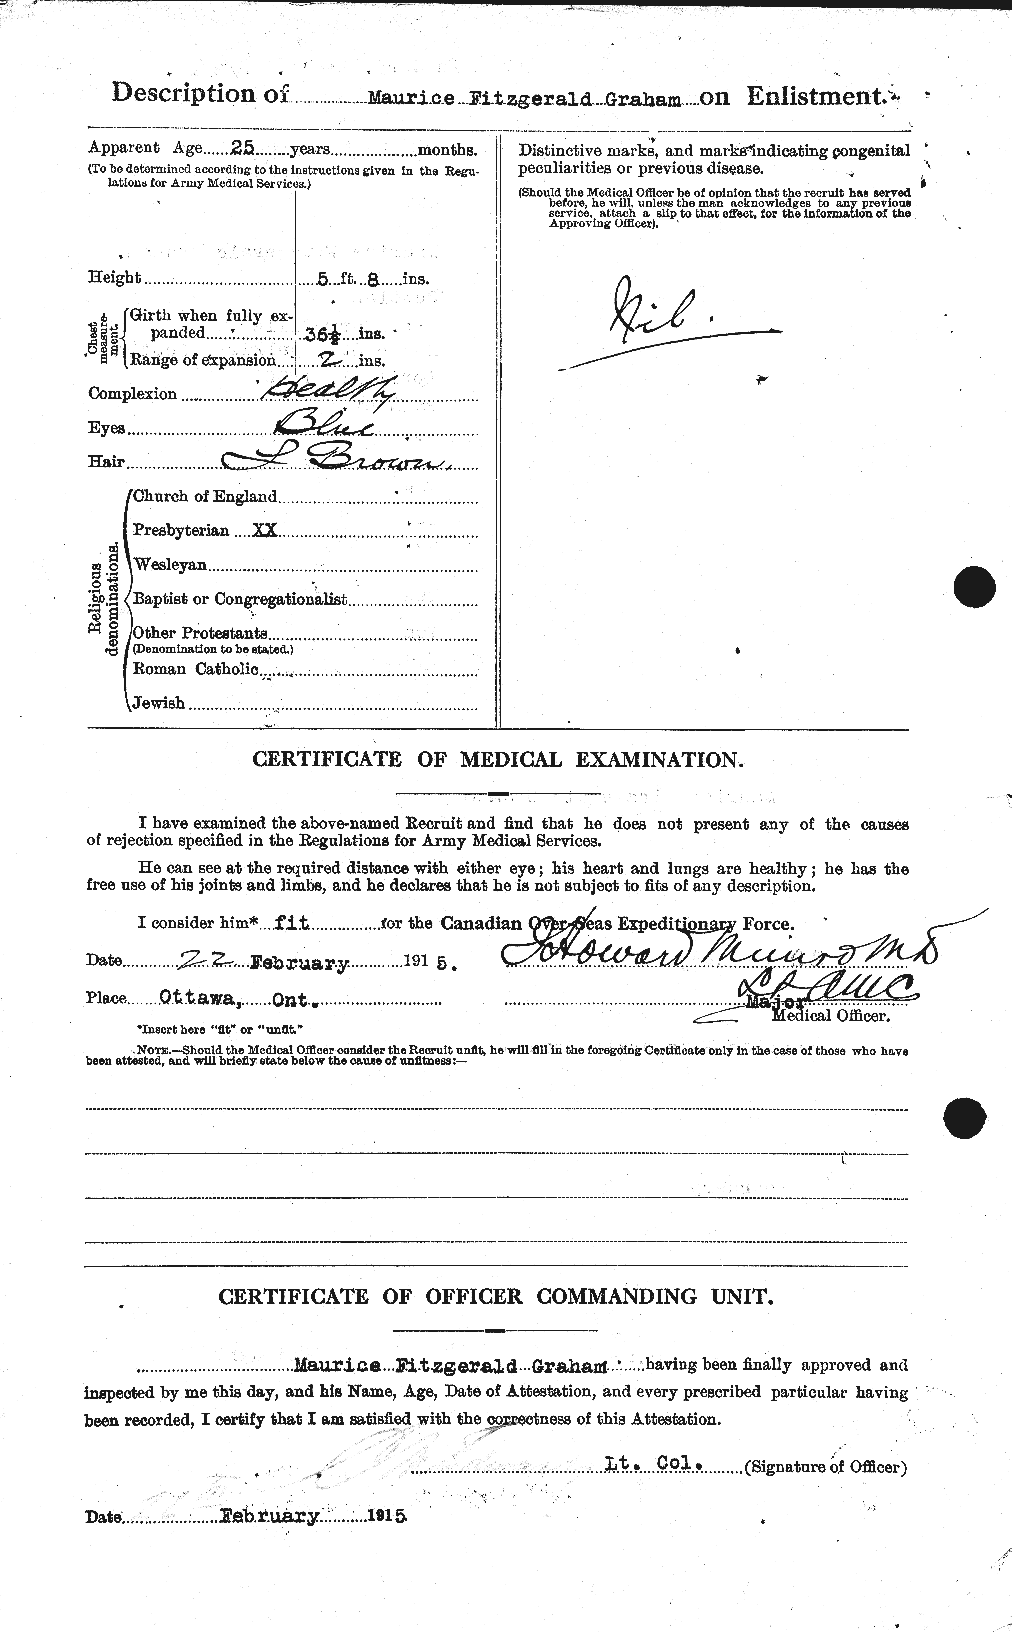 Personnel Records of the First World War - CEF 359298b